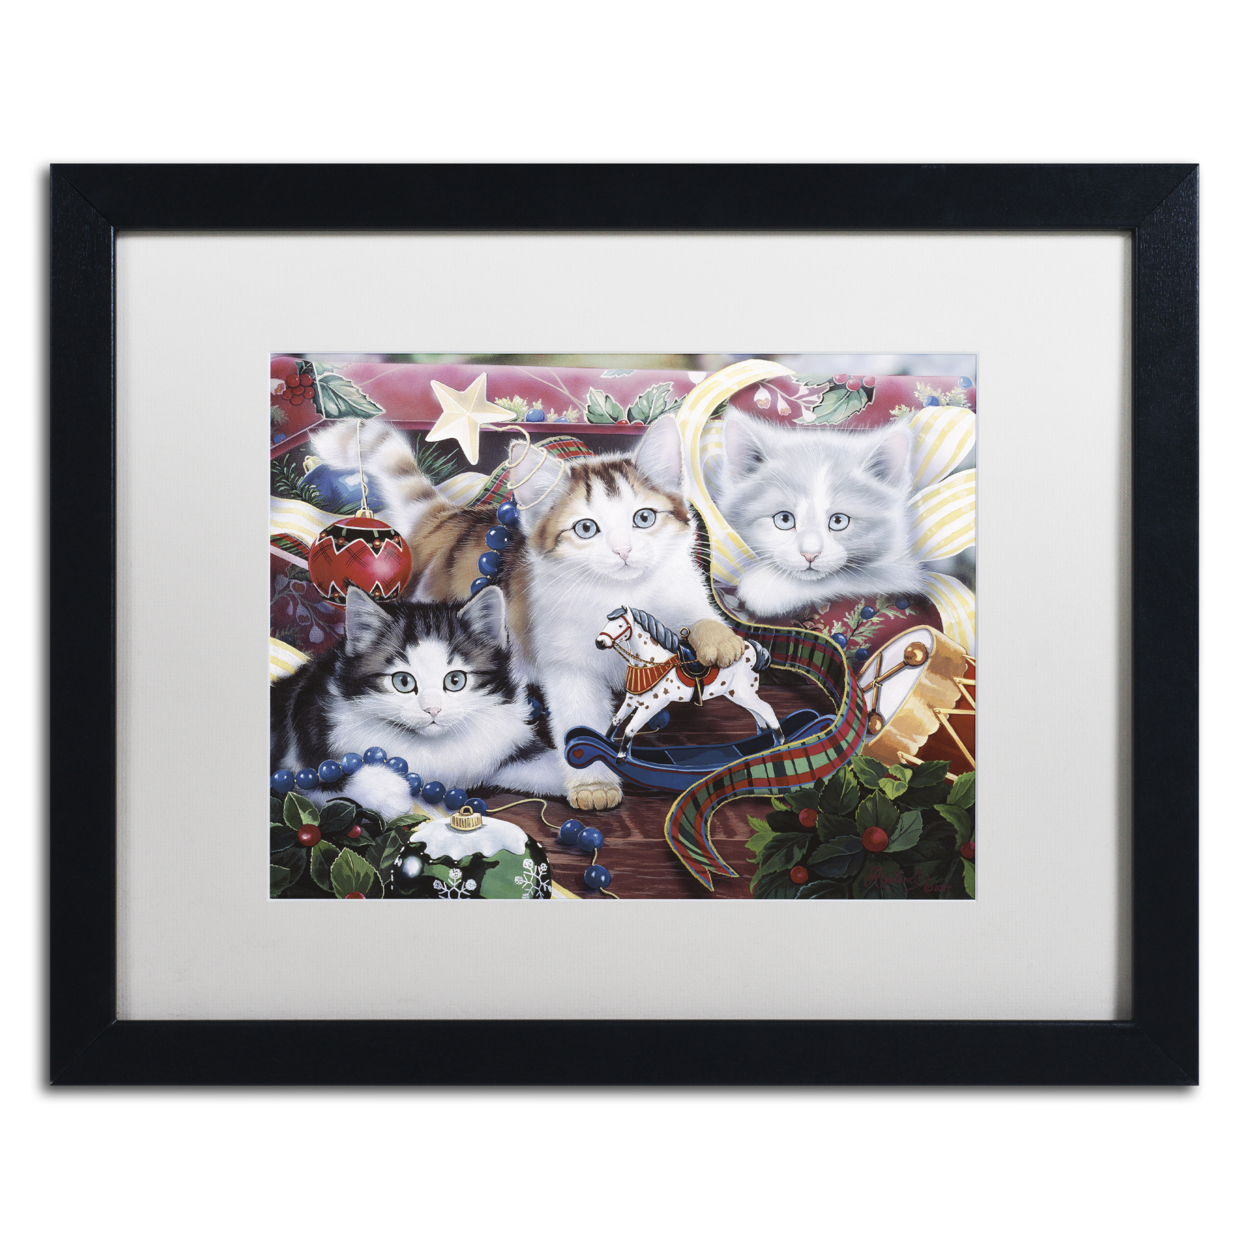 Jenny Newland 'Christmas Kittens & All The Trim'Ns' Black Wooden Framed Art 18 X 22 Inches